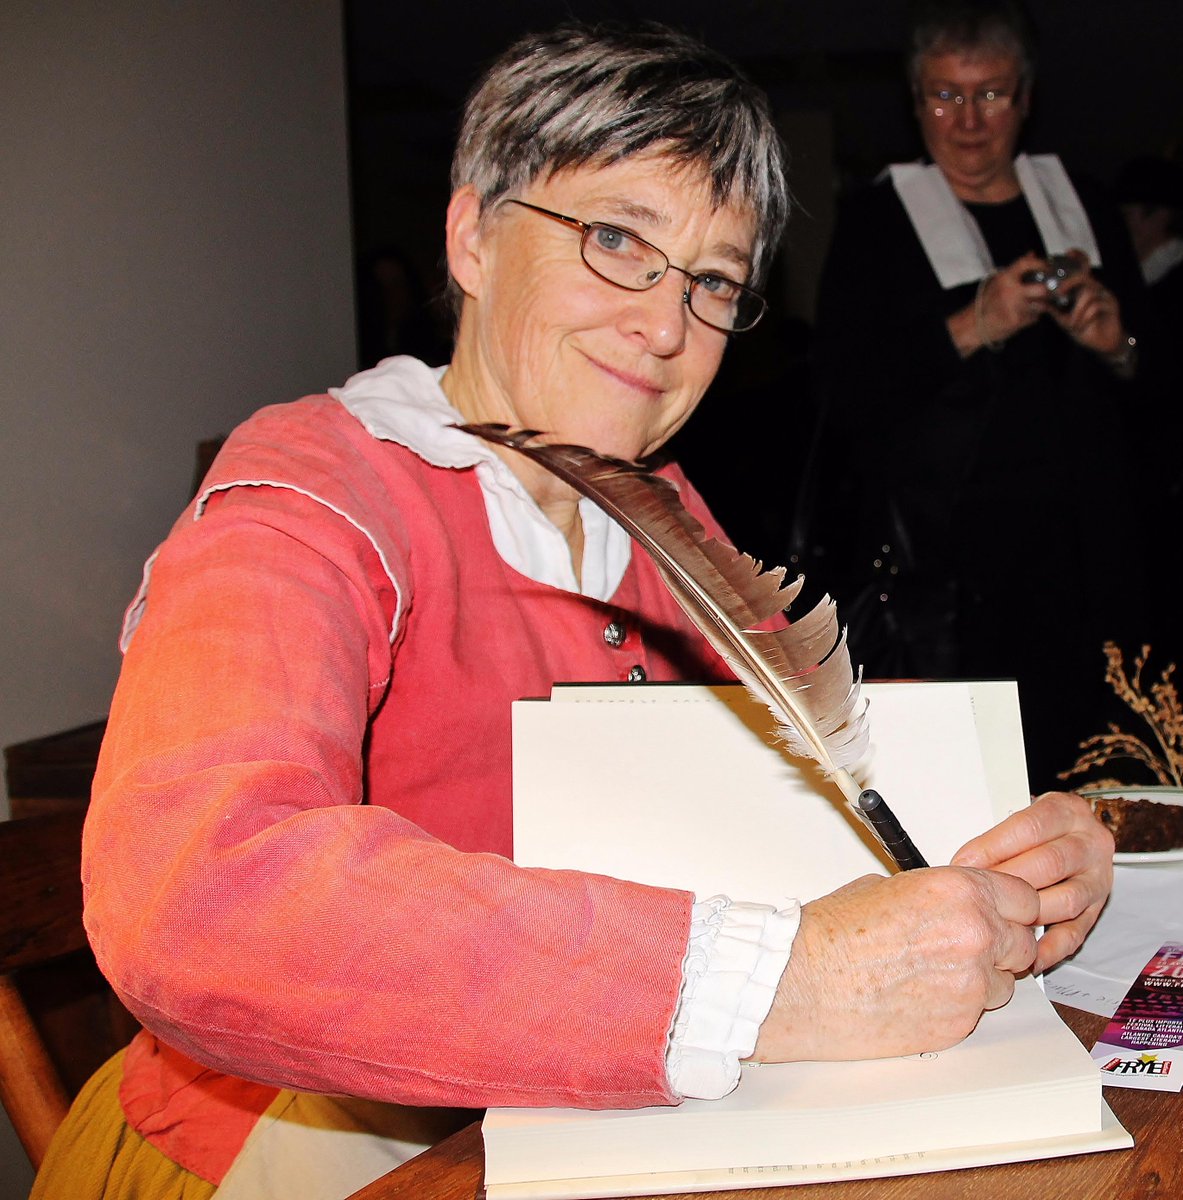 AMAZING pictures from @bethpowning launch for #AMeasureOfLight #Stylin #Quakers @RandomHouseCA bit.ly/1BK2Uvd